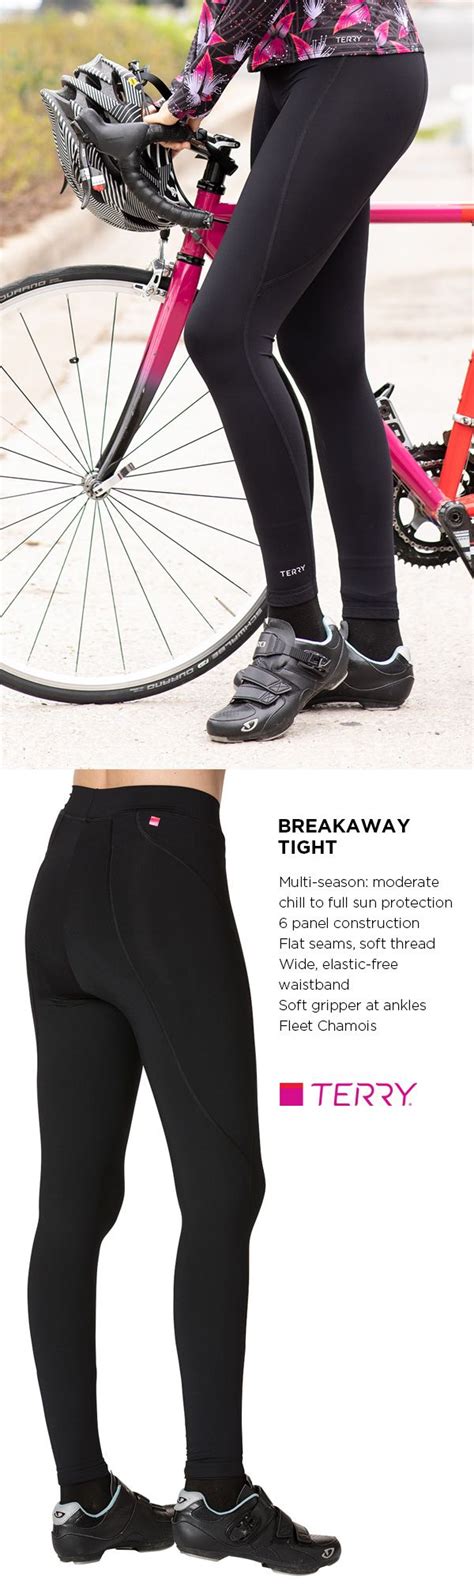 womens cycling tights  terry  breakaway tight  curvaceous